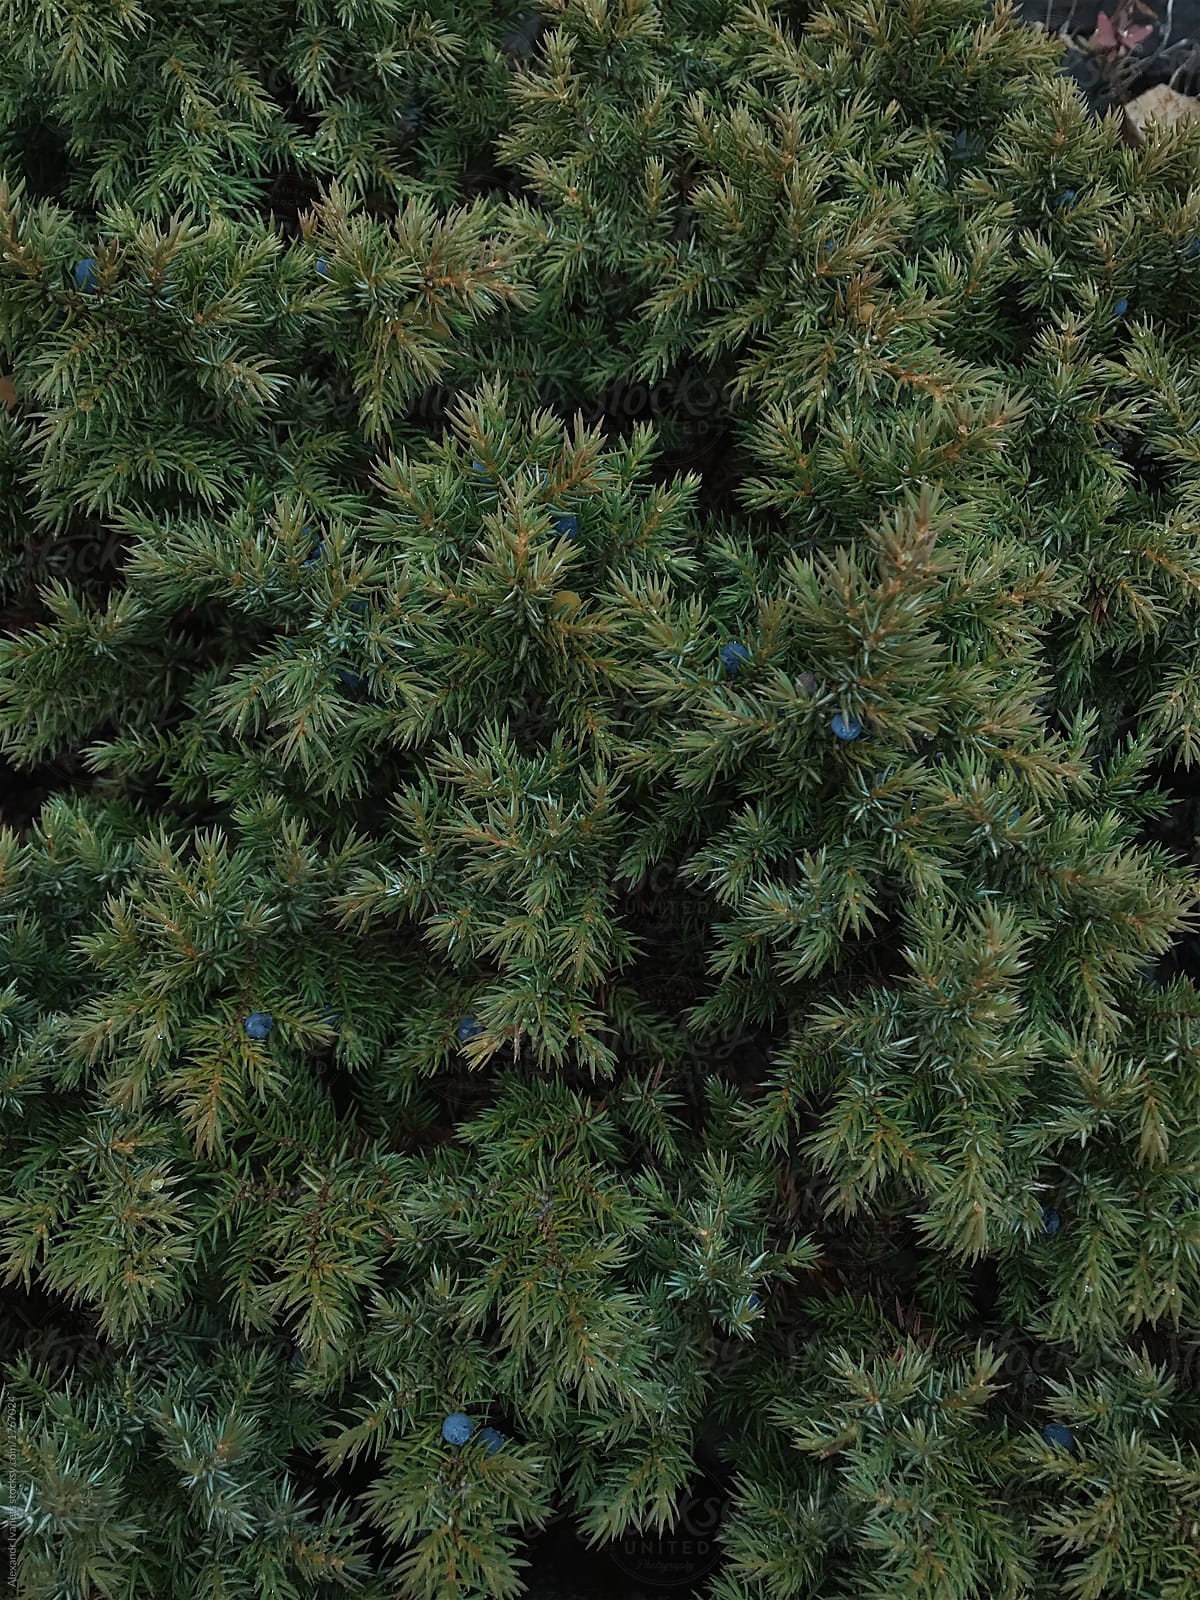 Green spruce trees with berries